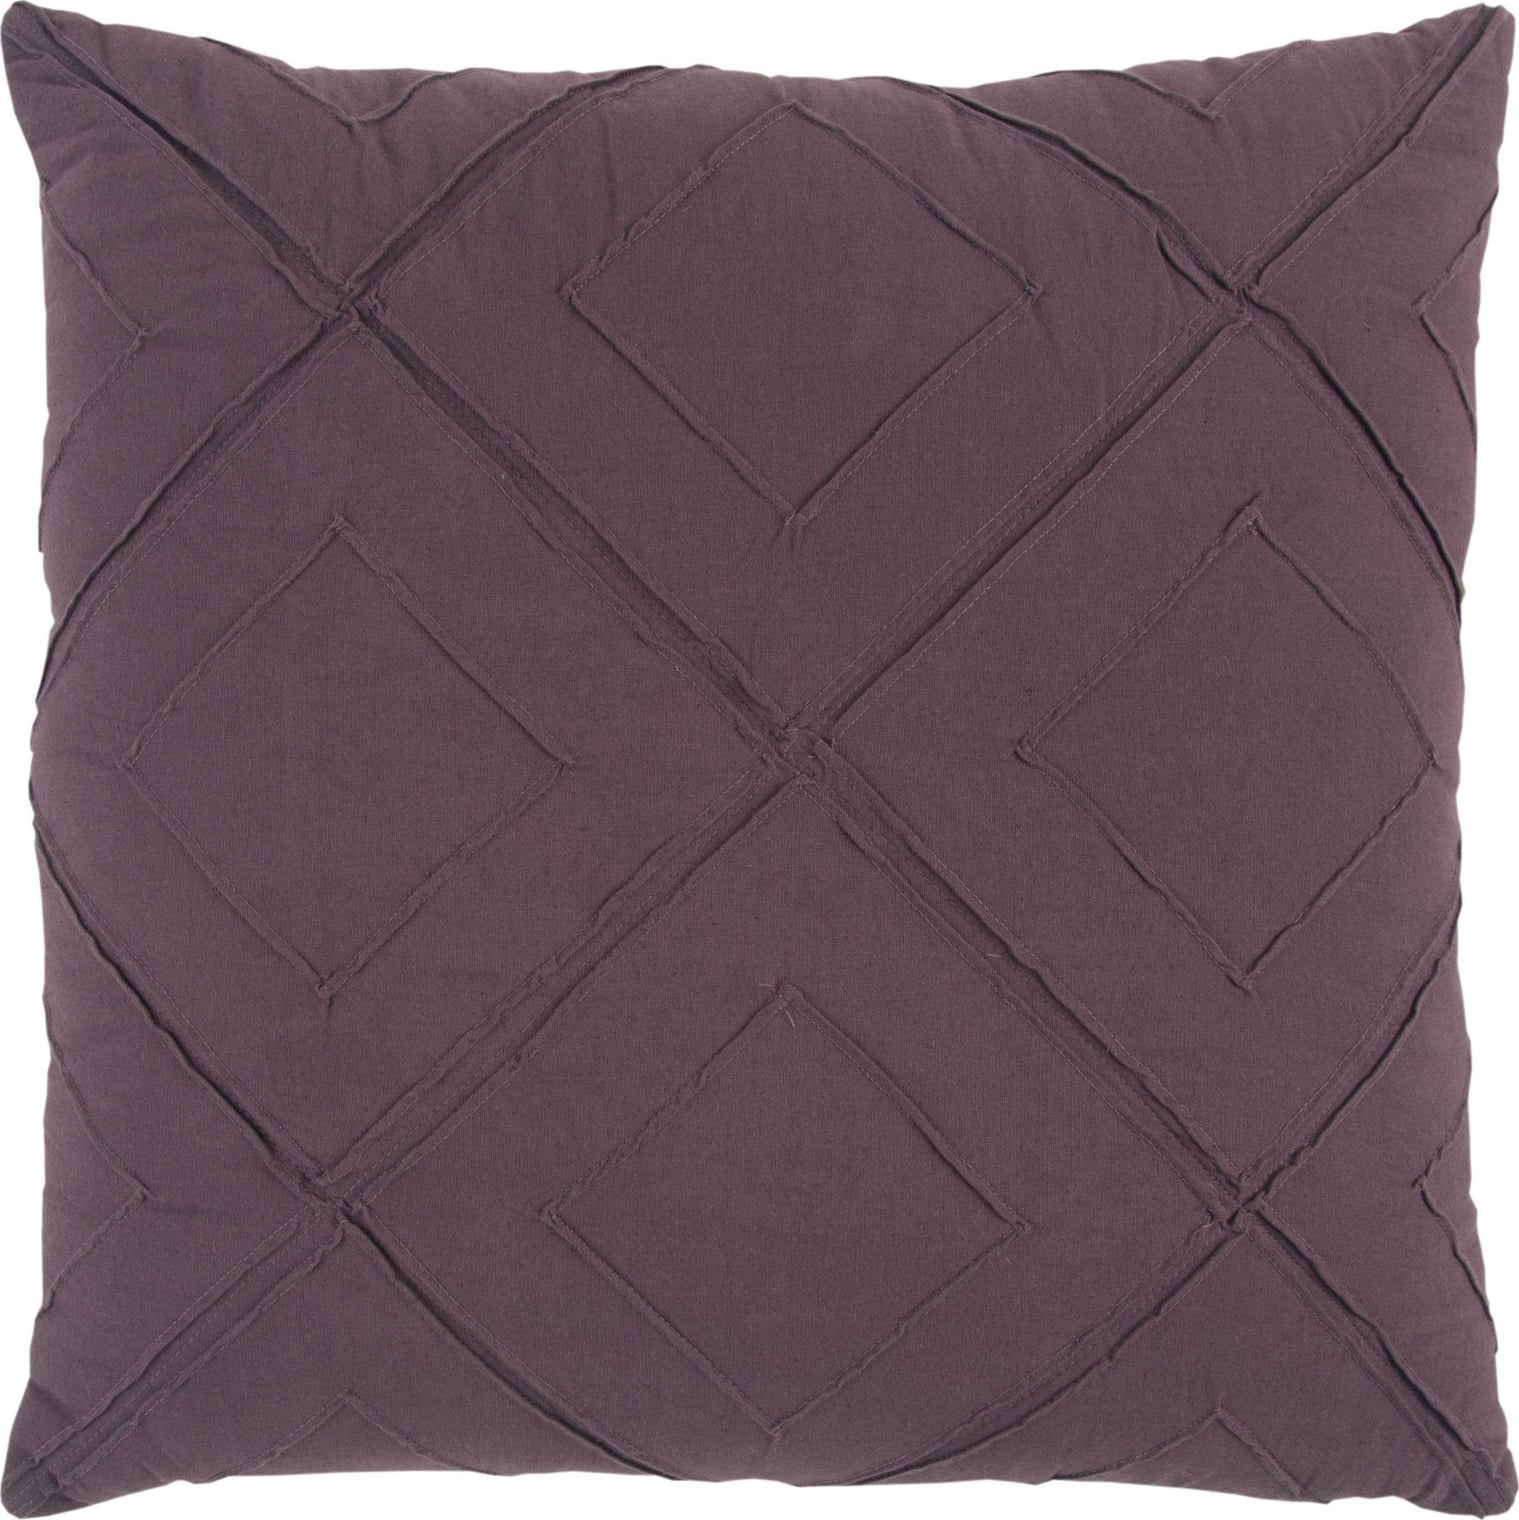 Rizzy Pillows T13268 Wine